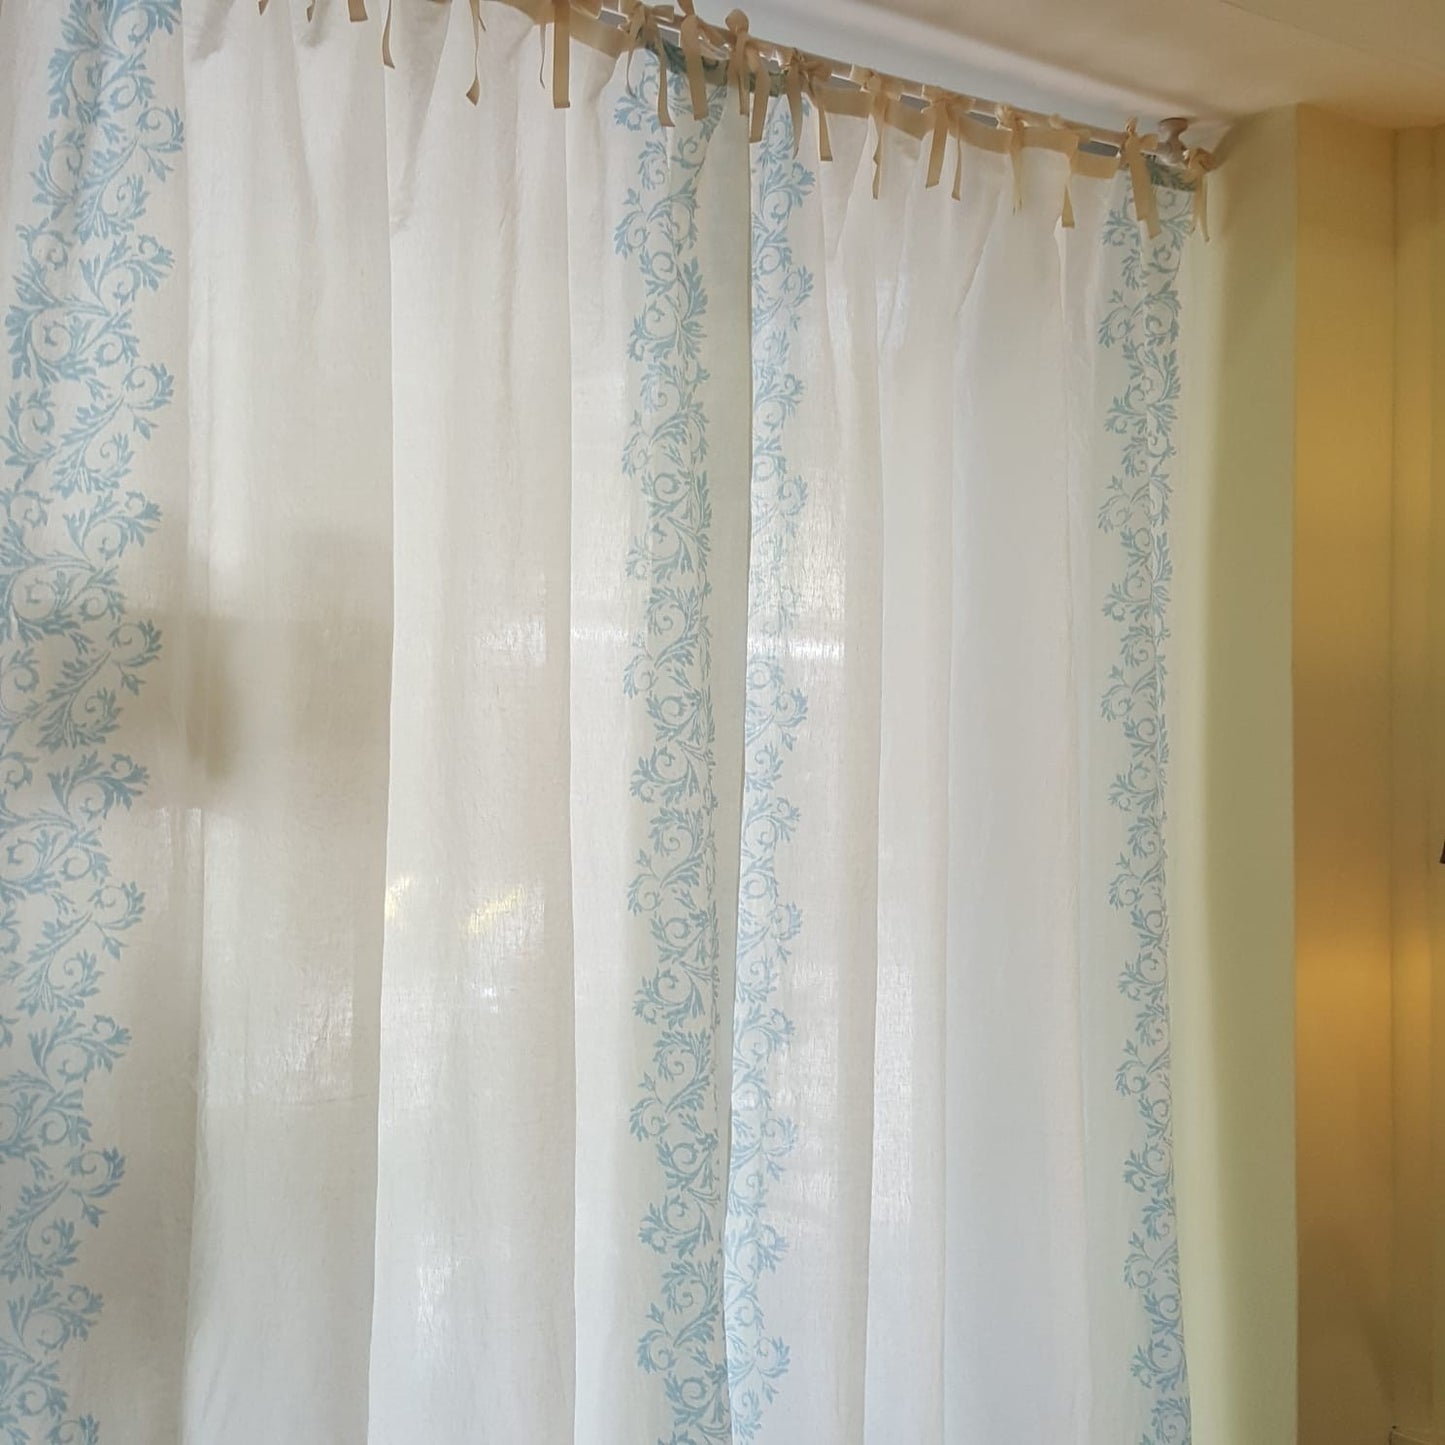 Curtains in crumpled natural linen from the Acanto collection